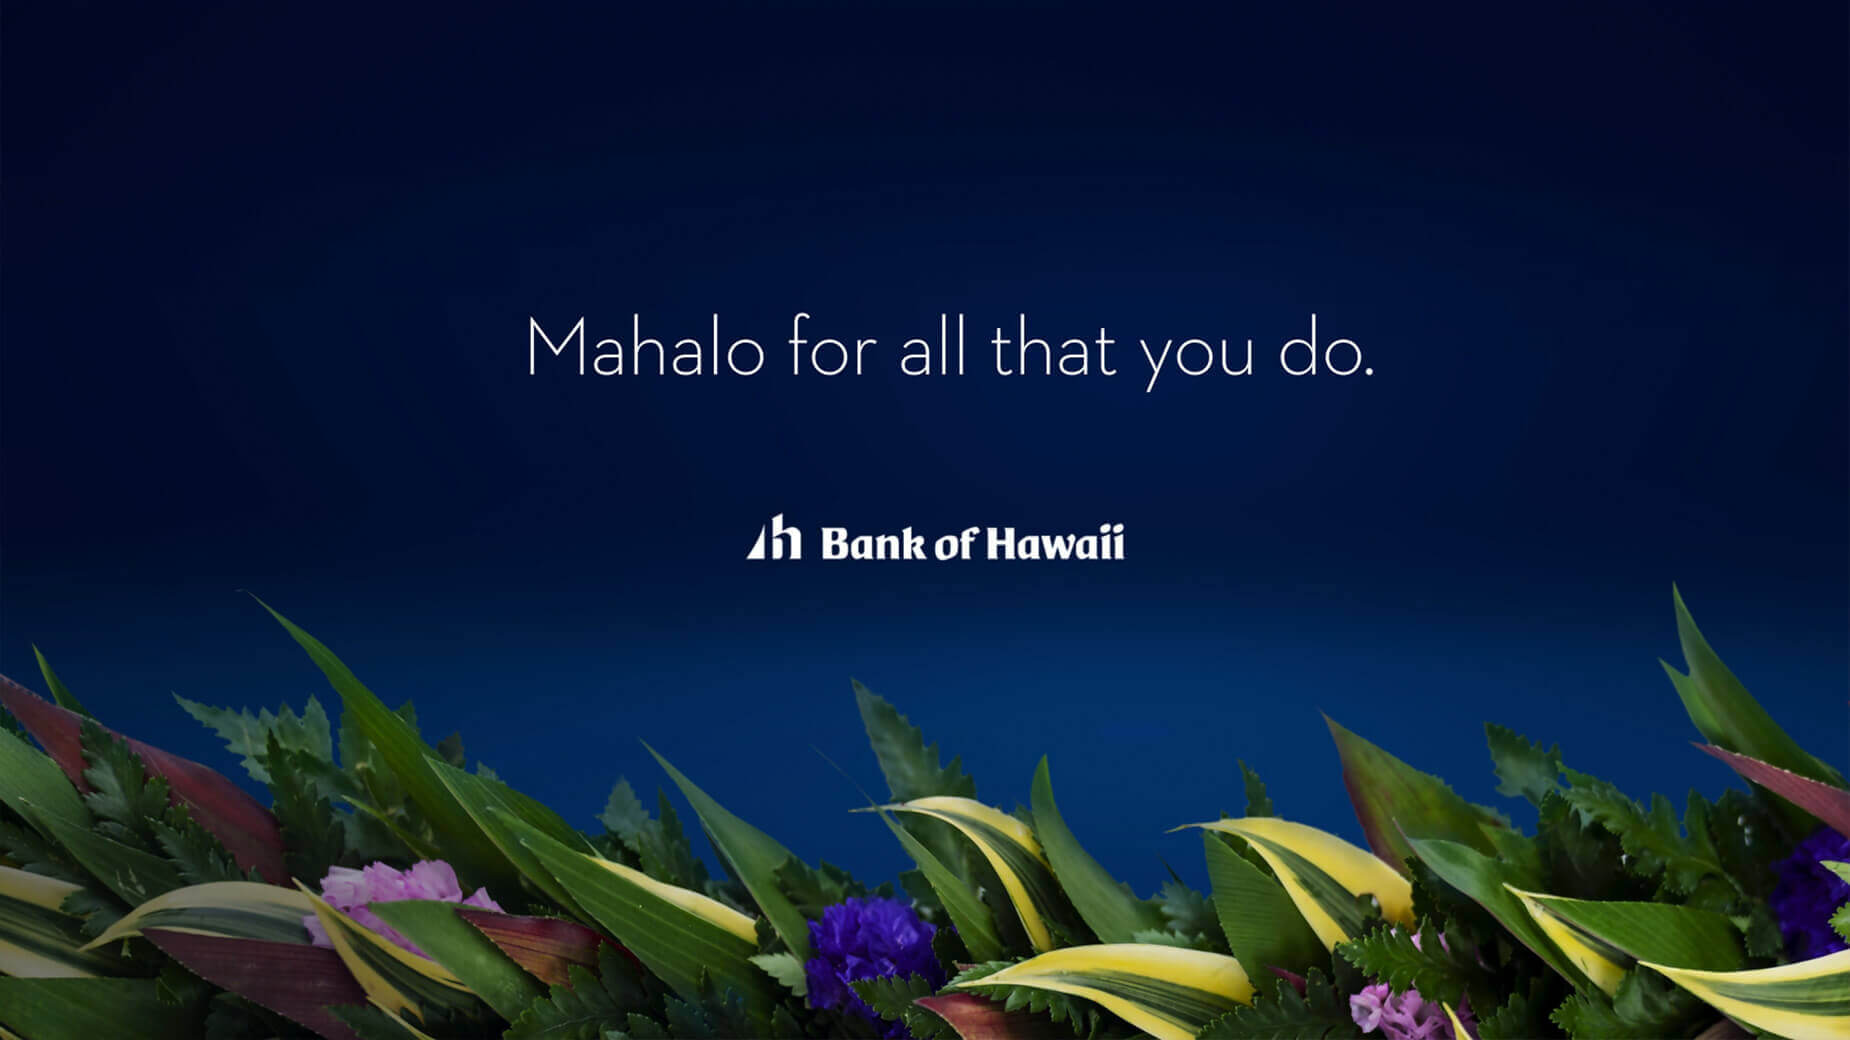 Mahalo for all that you do.